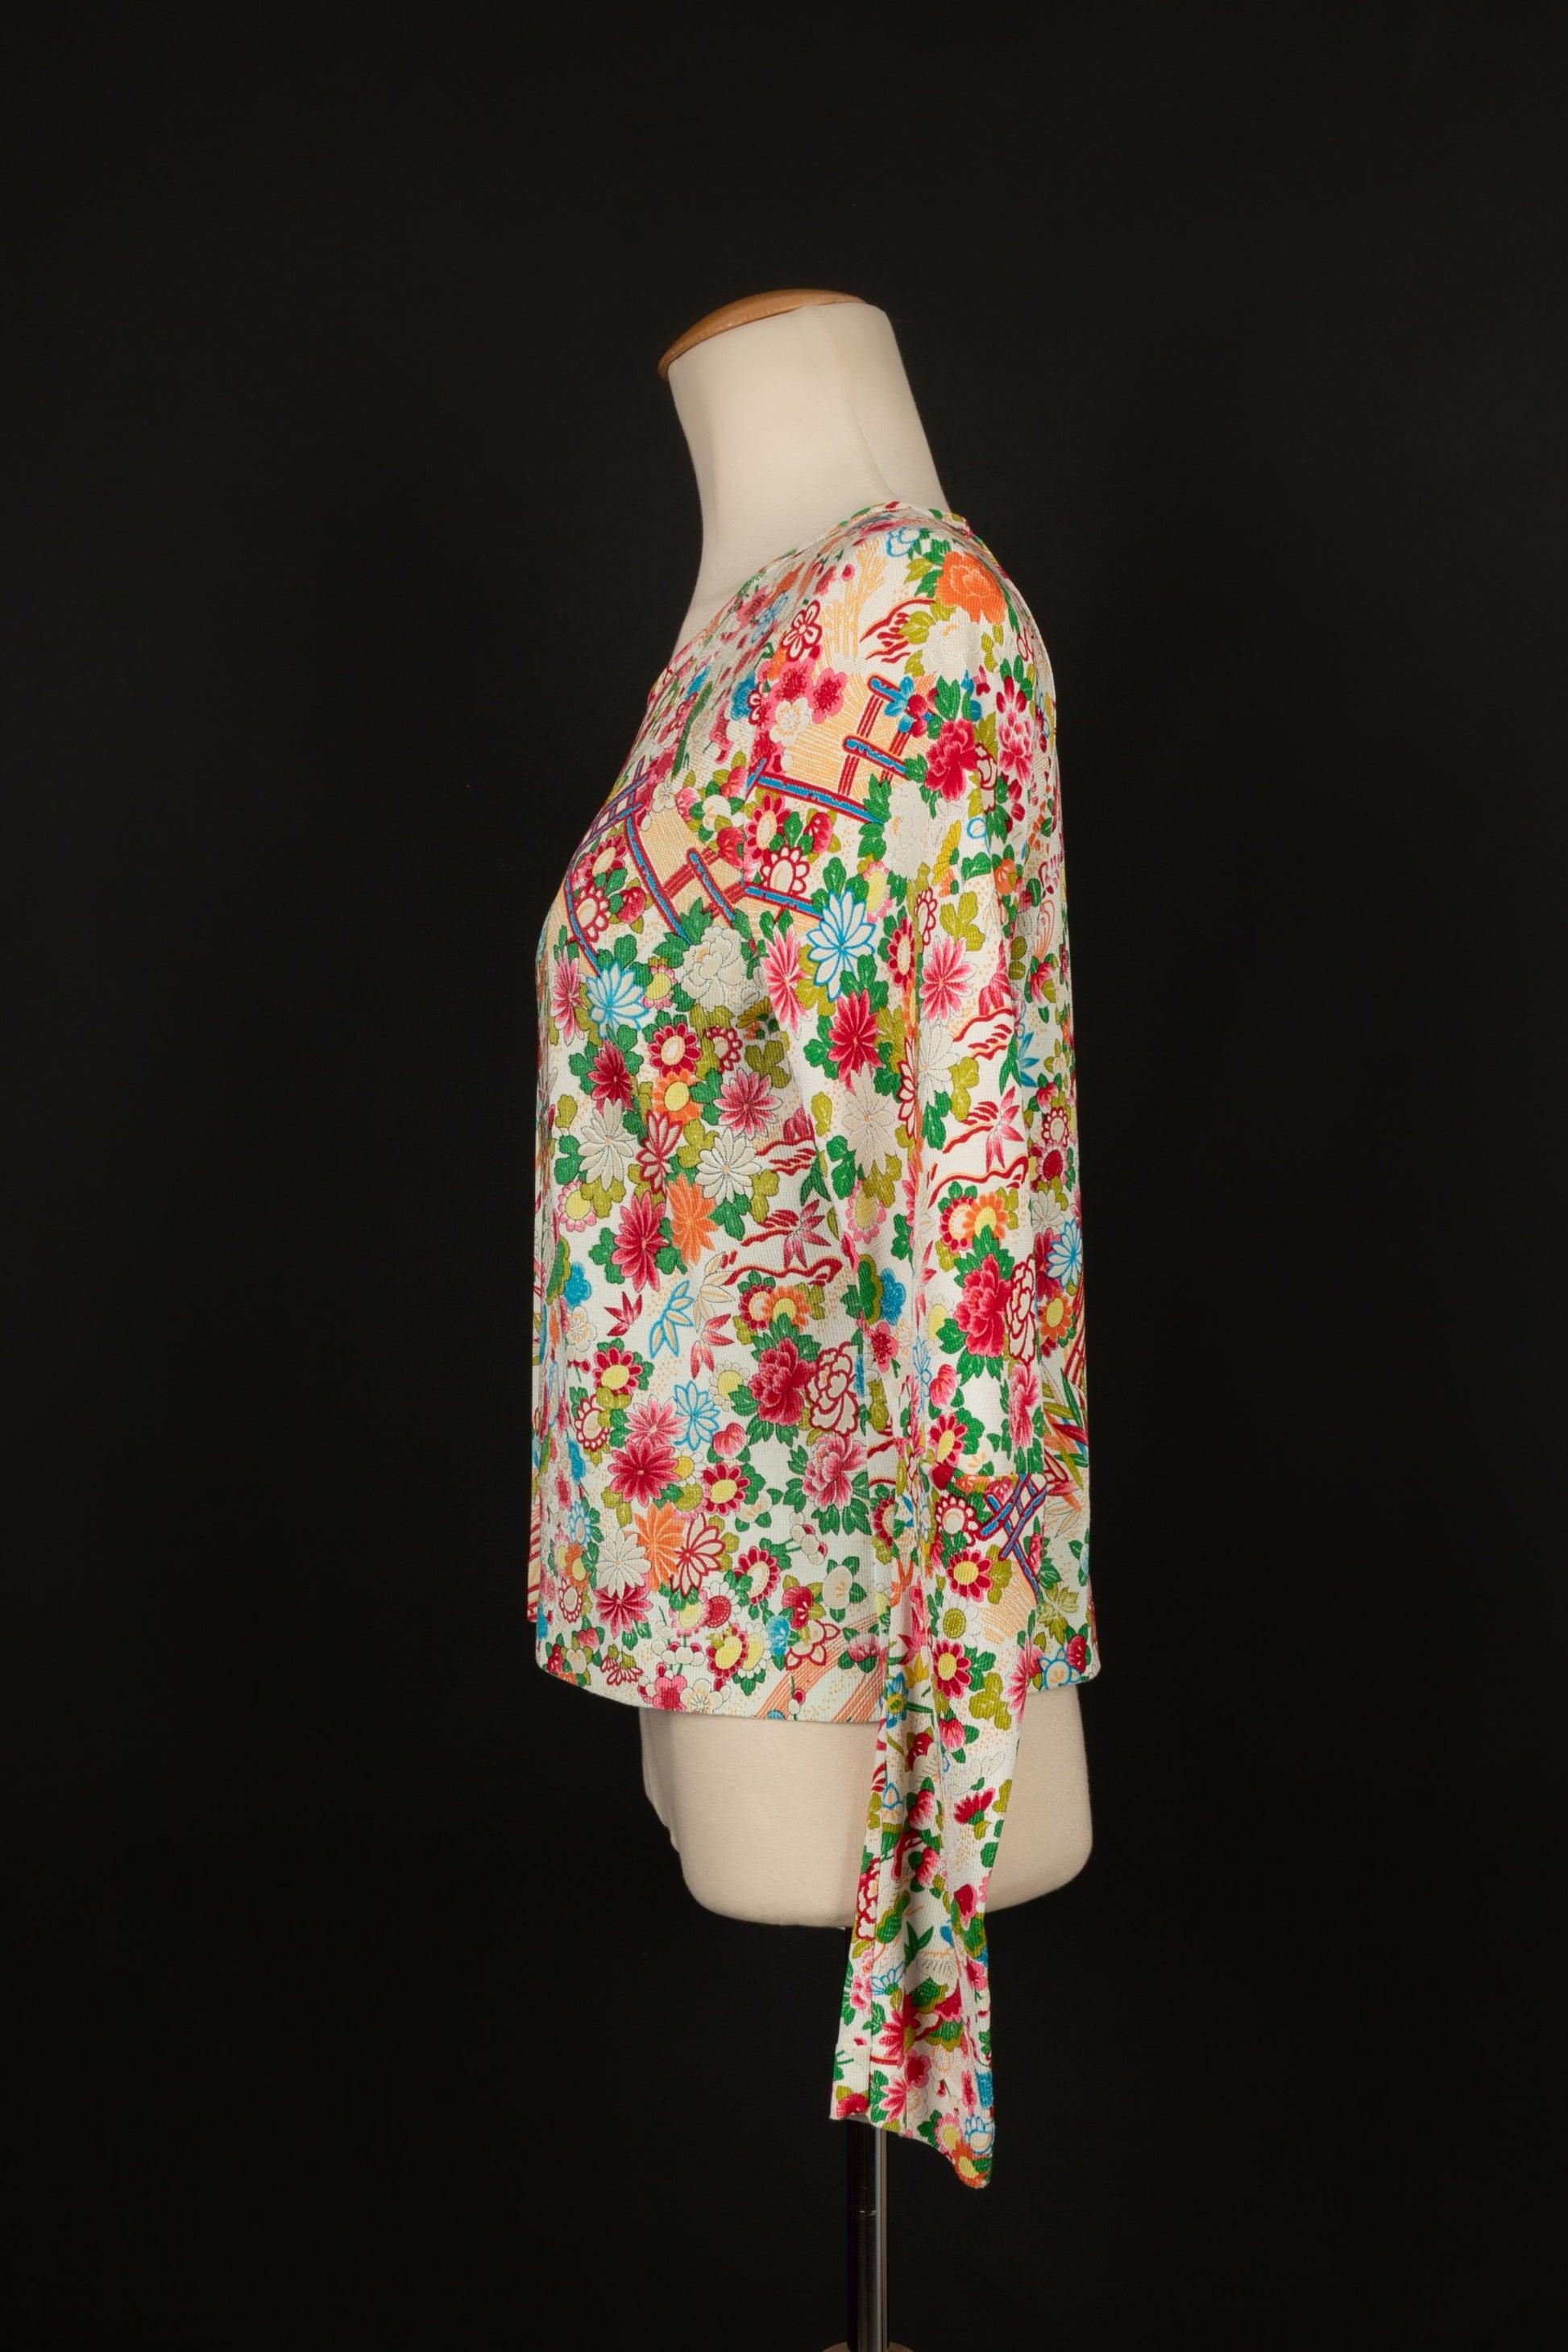 Dior- Long-sleeved top with multicolored flower patterns. No size indicated, it fits a 36FR.

Additional information:
Condition: Very good condition
Dimensions: Shoulder width: 36 cm - Chest: 48 cm - Sleeve length: 68 cm - Length: 53 cm
Seller